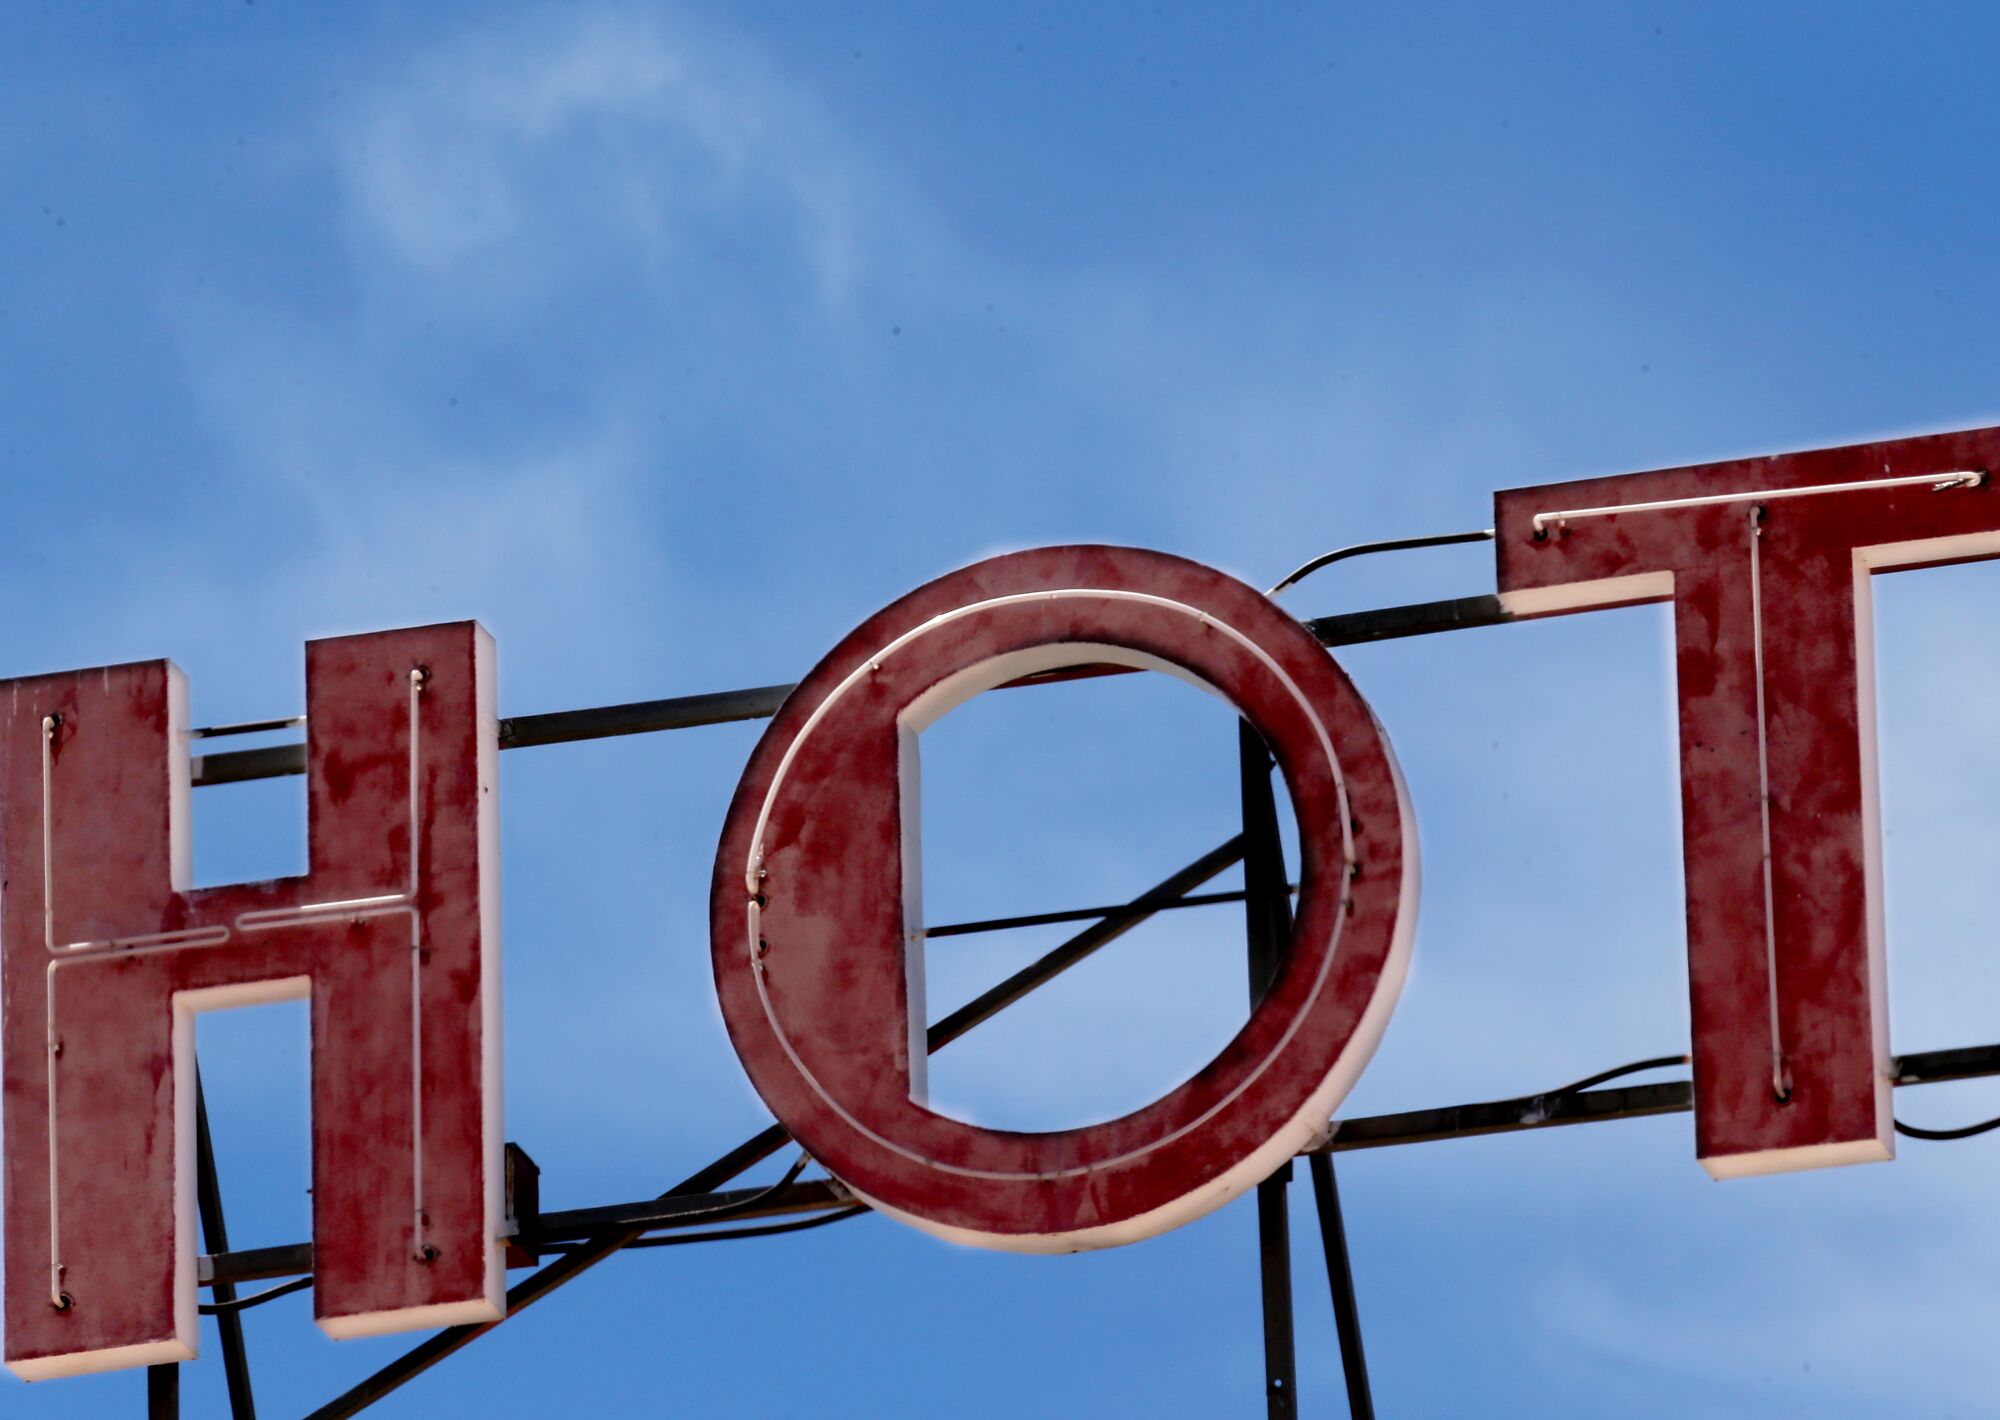 Three letters in a hotel sign spell out "HOT."